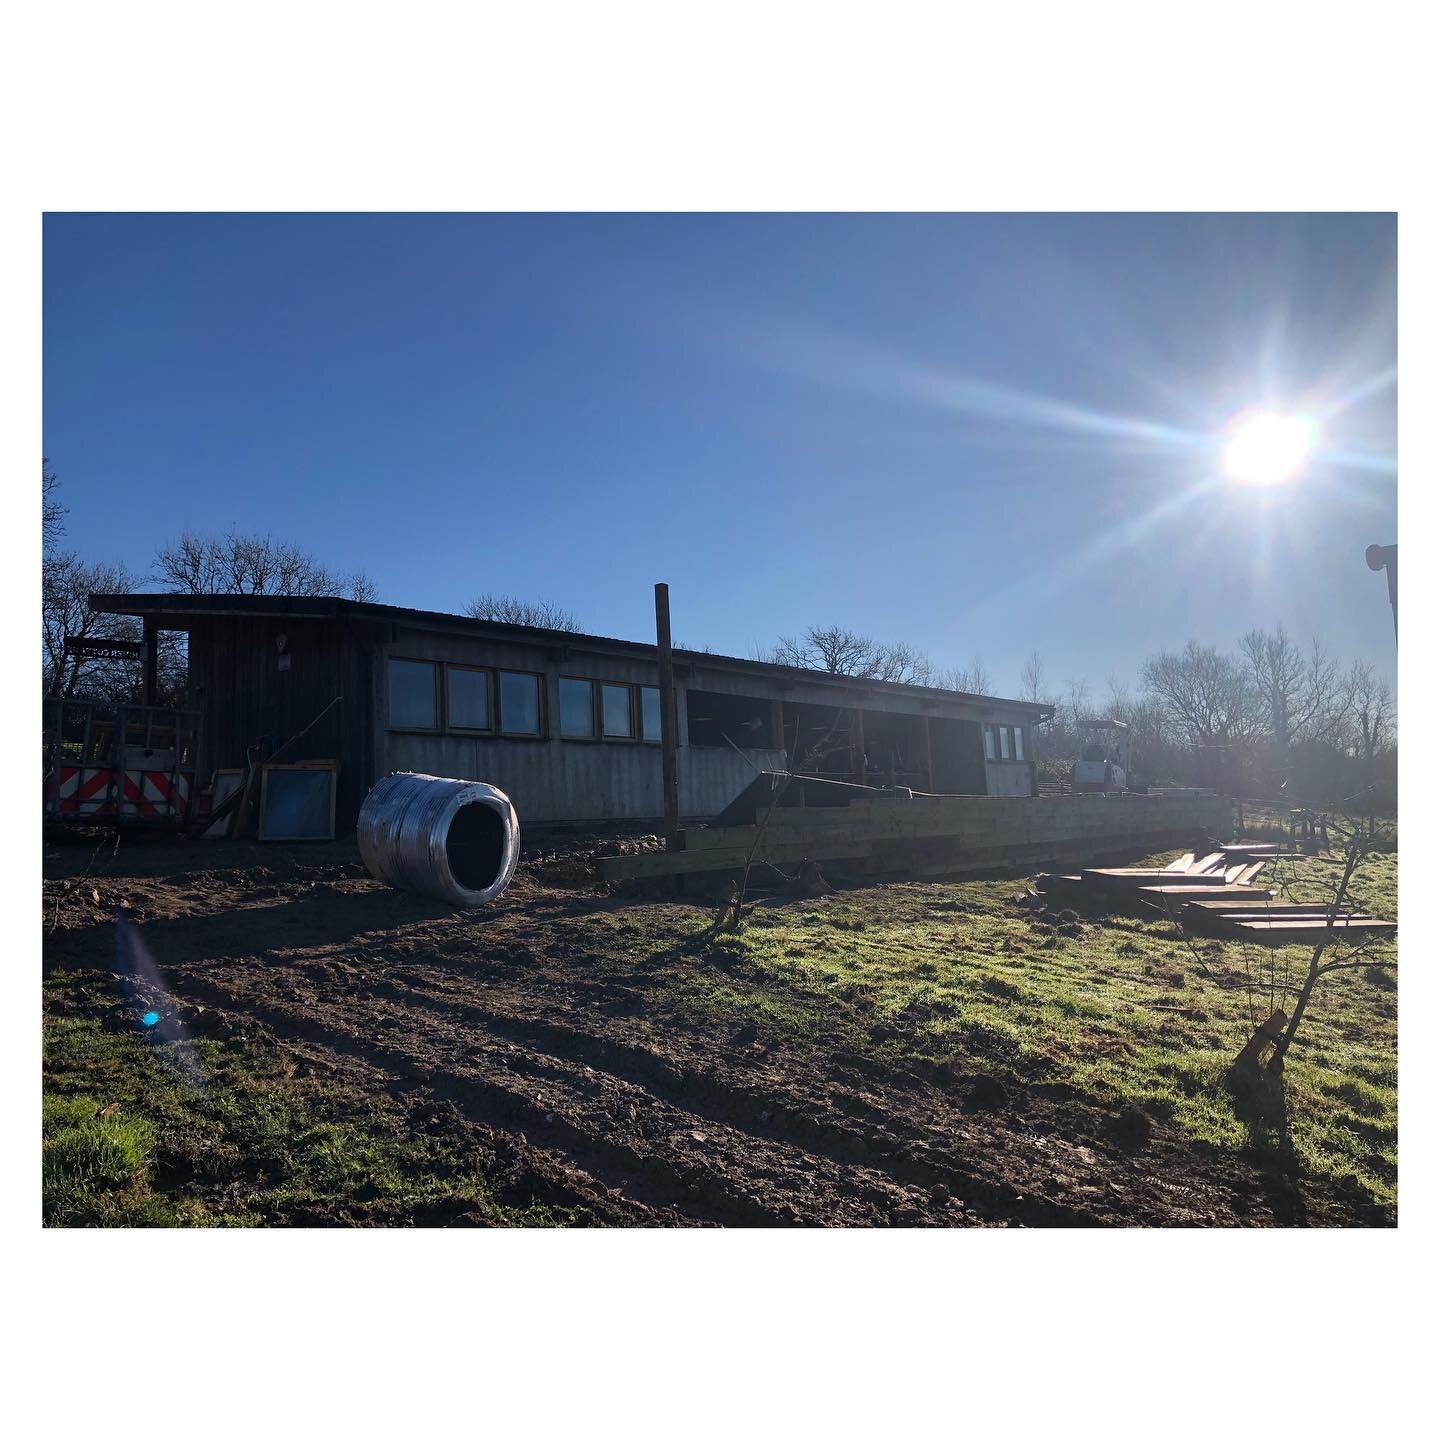 On site. Work has started @rivercottagehq converting the office building to a caf&eacute;. The outside seating area is being formed as are the new openings for @monocleofsherborne to fill with glass in a few weeks time. The size of the contractor&rsq